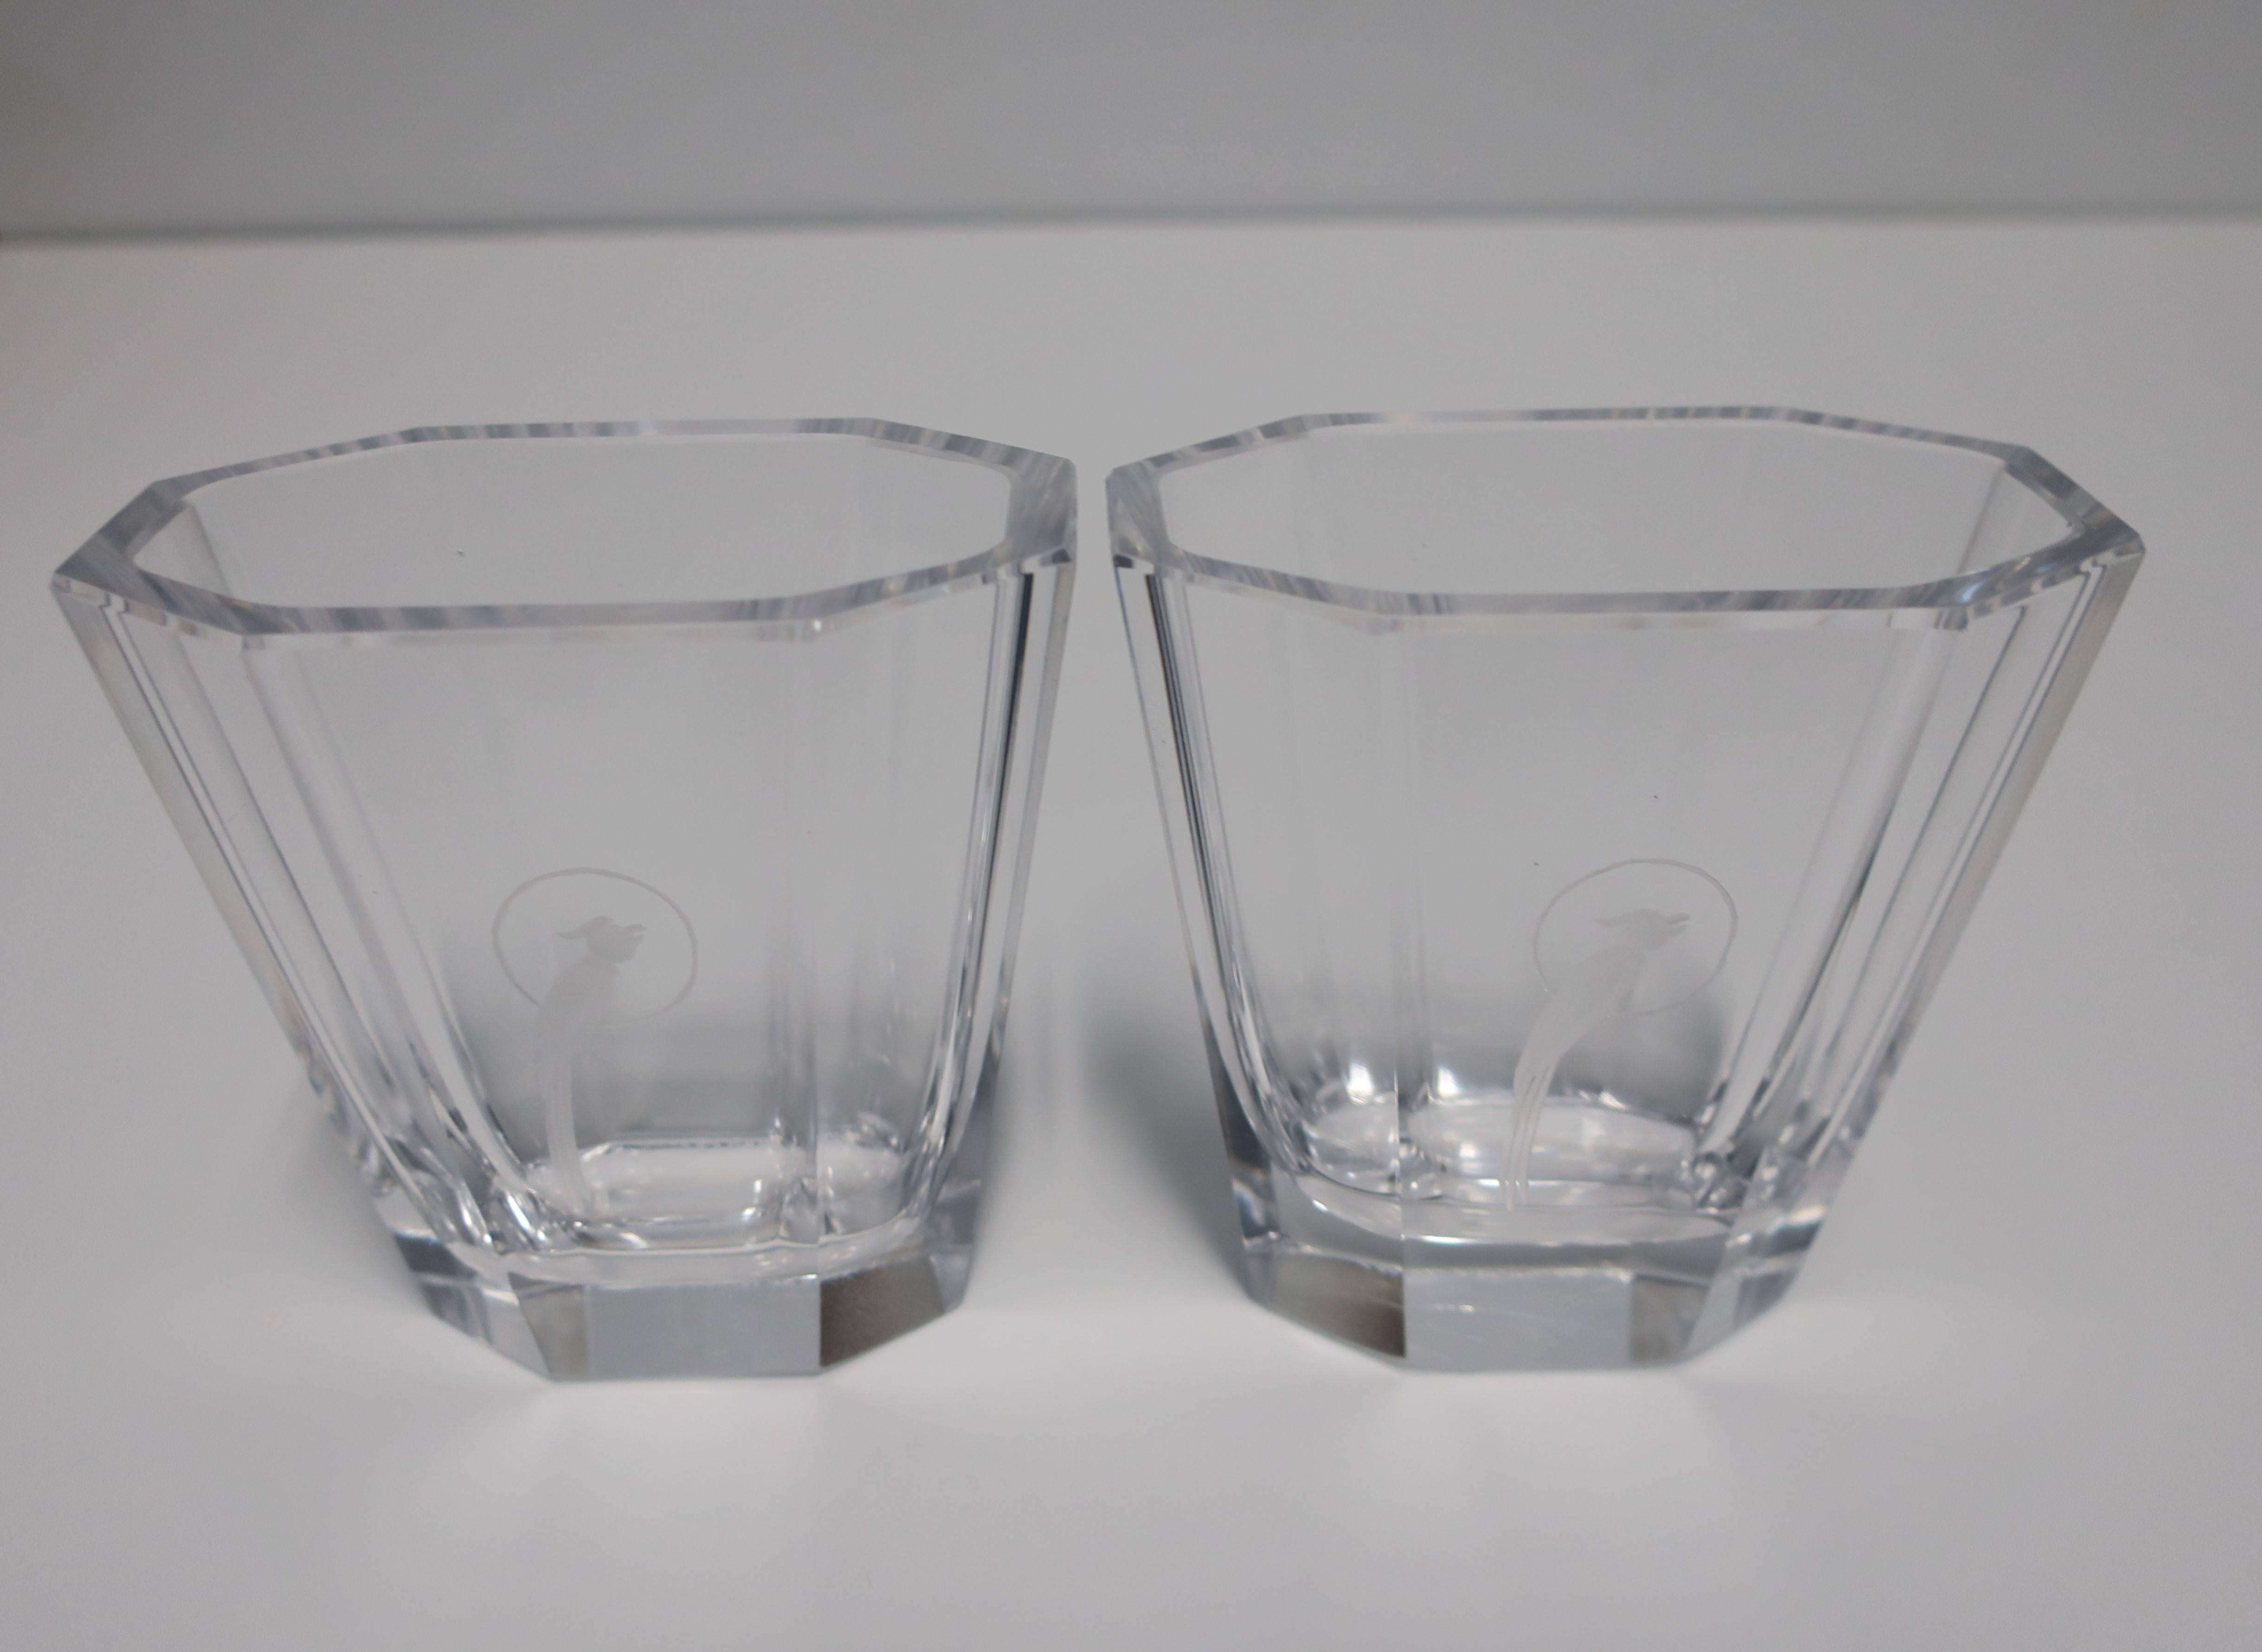 Scandinavian Modern Art Deco Crystal Vases with Parrot Bird Design In Excellent Condition For Sale In New York, NY